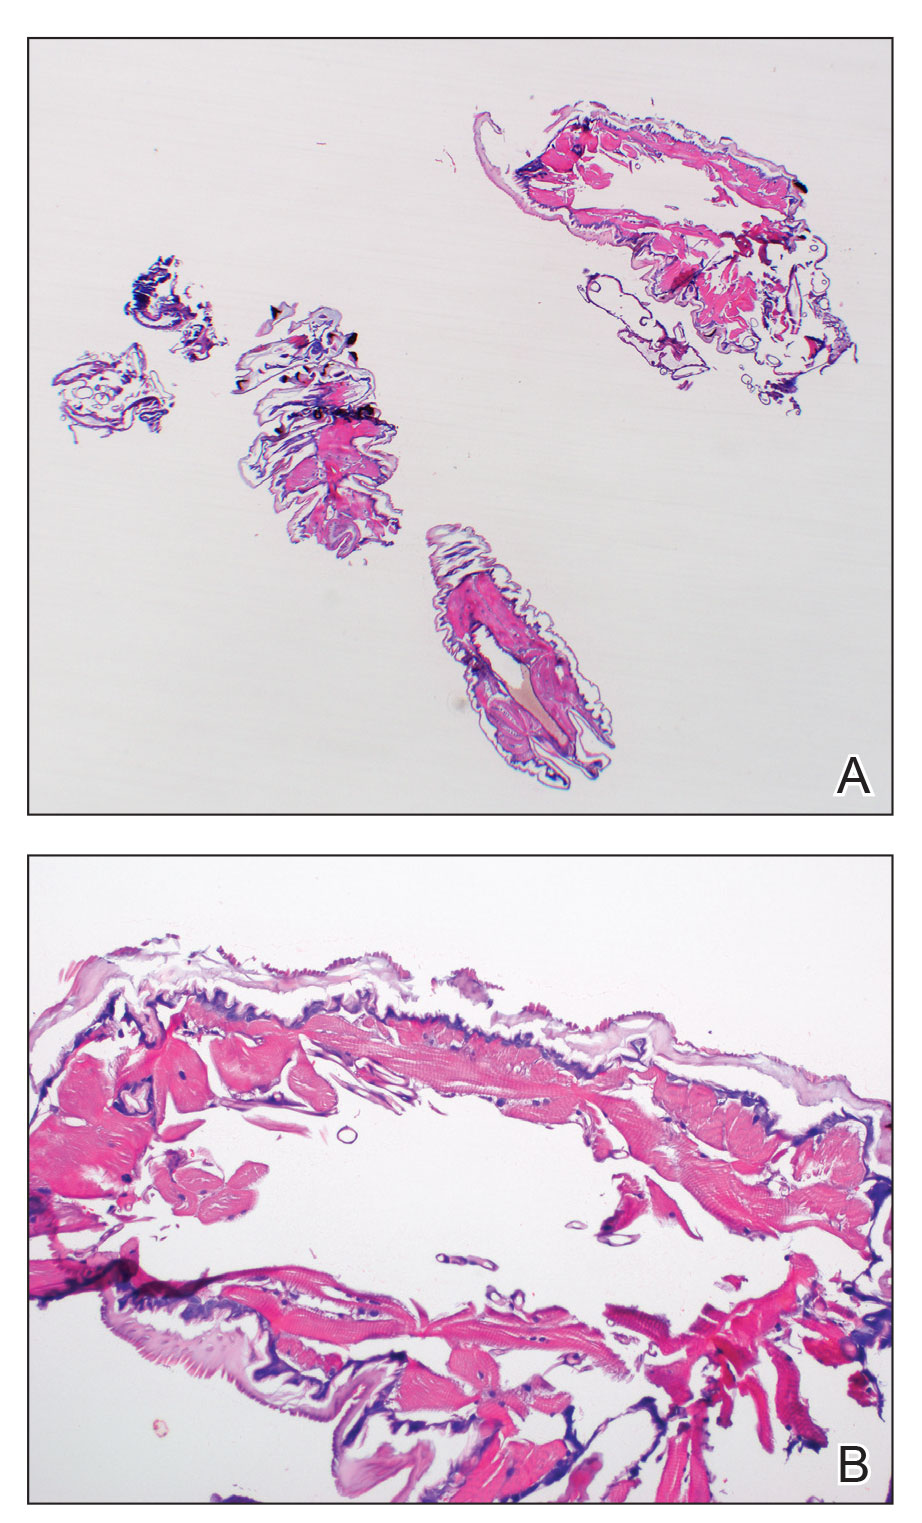 Histopathology showed an undulating chitinous exoskeleton and pigmented spines (setae) protruding from exoskeleton with associated superficial perivascular lymphohistiocytic infiltrates